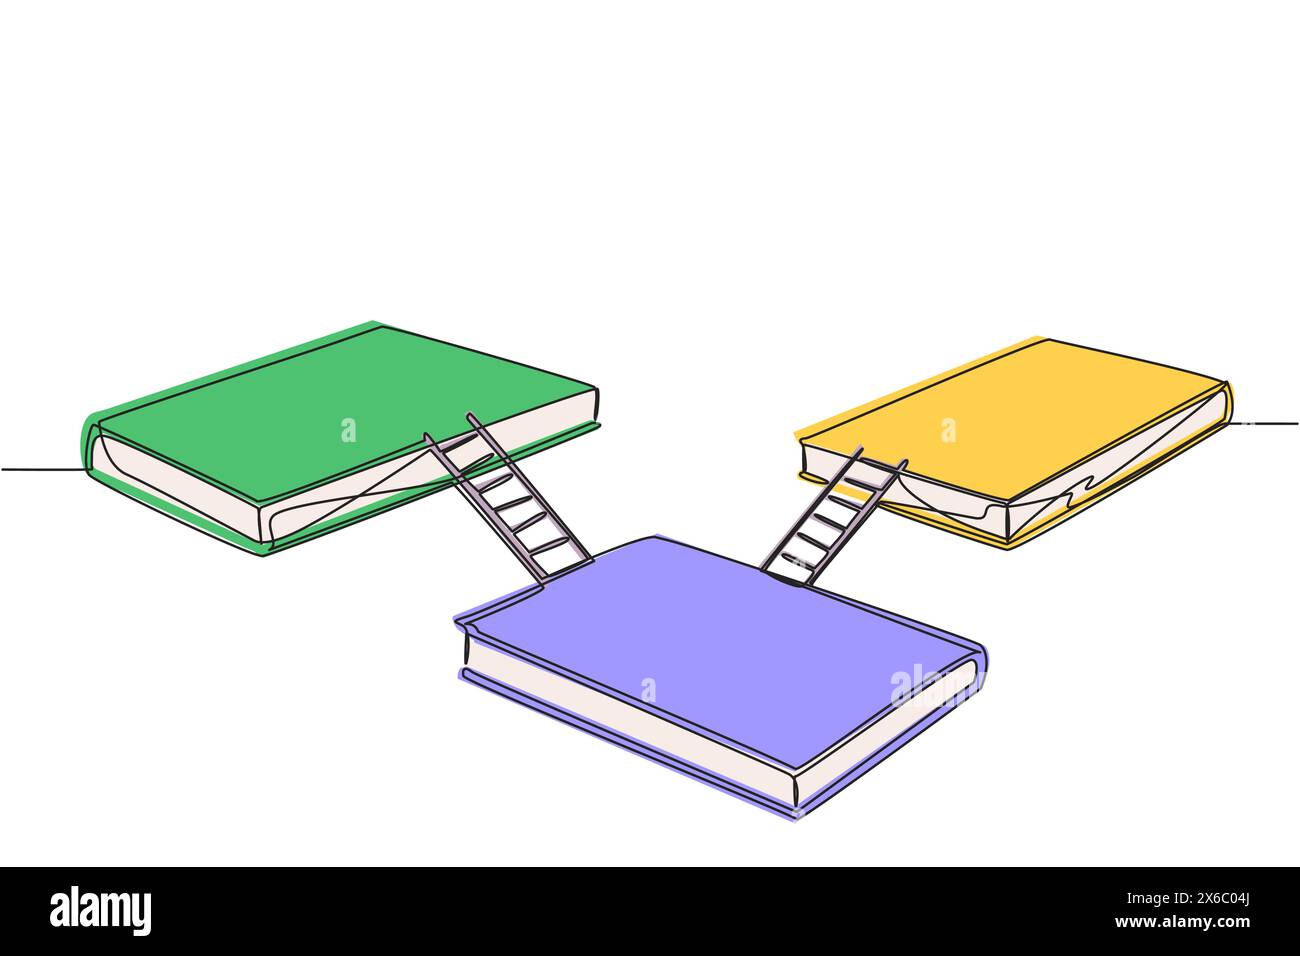 Single continuous line drawing three large books connected by stairs. Expo exhibition stage. Booth for exhibiting books. Book festival at outer space. Stock Vector